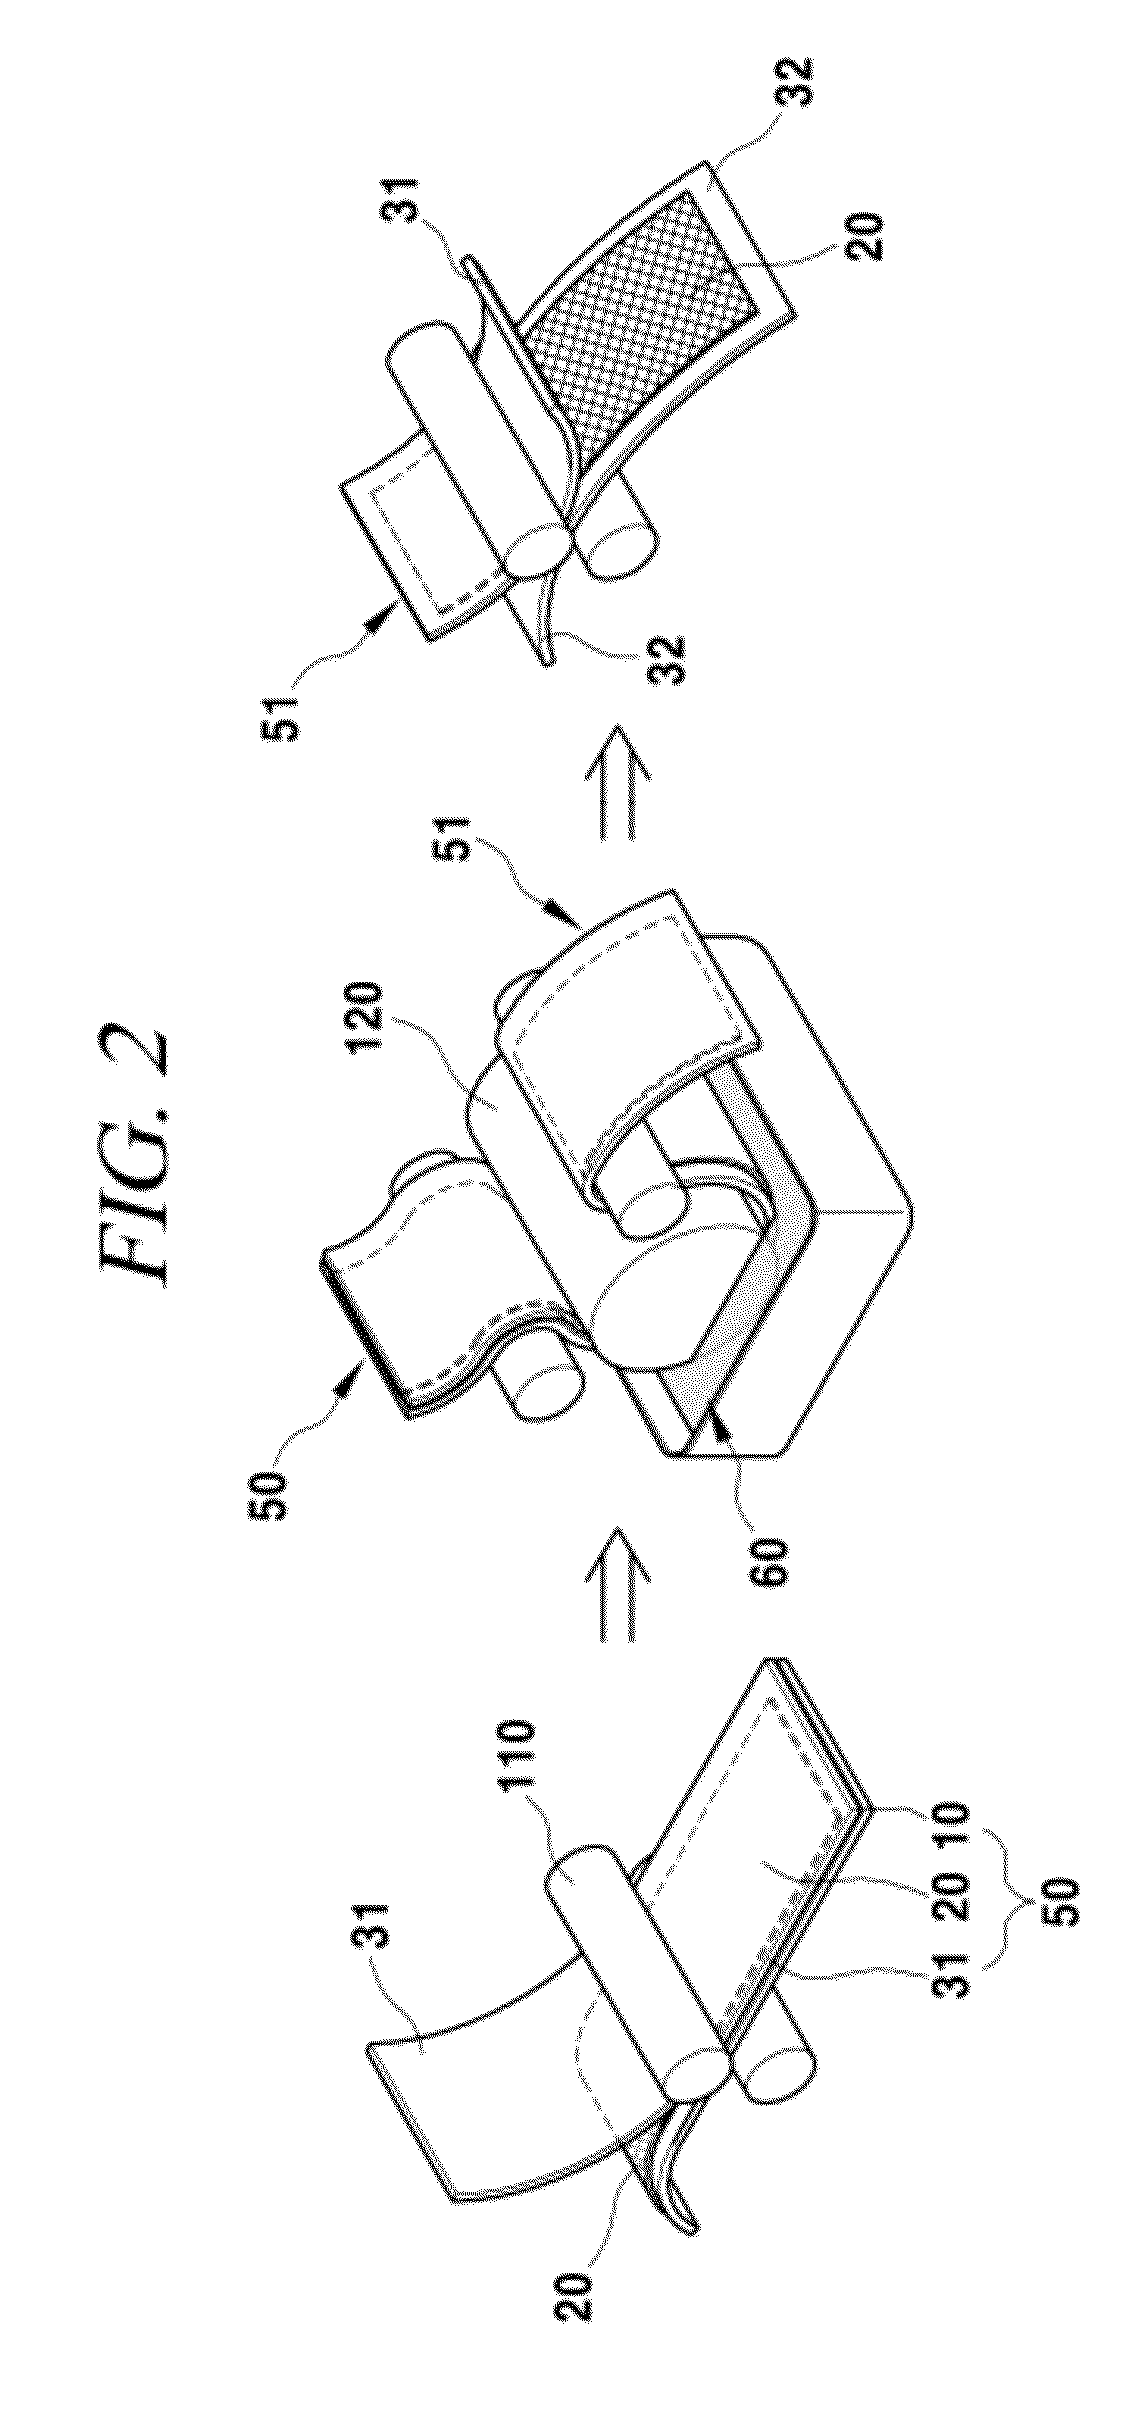 Graphene protective film serving as a gas and moisture barrier, method for forming same, and use thereof